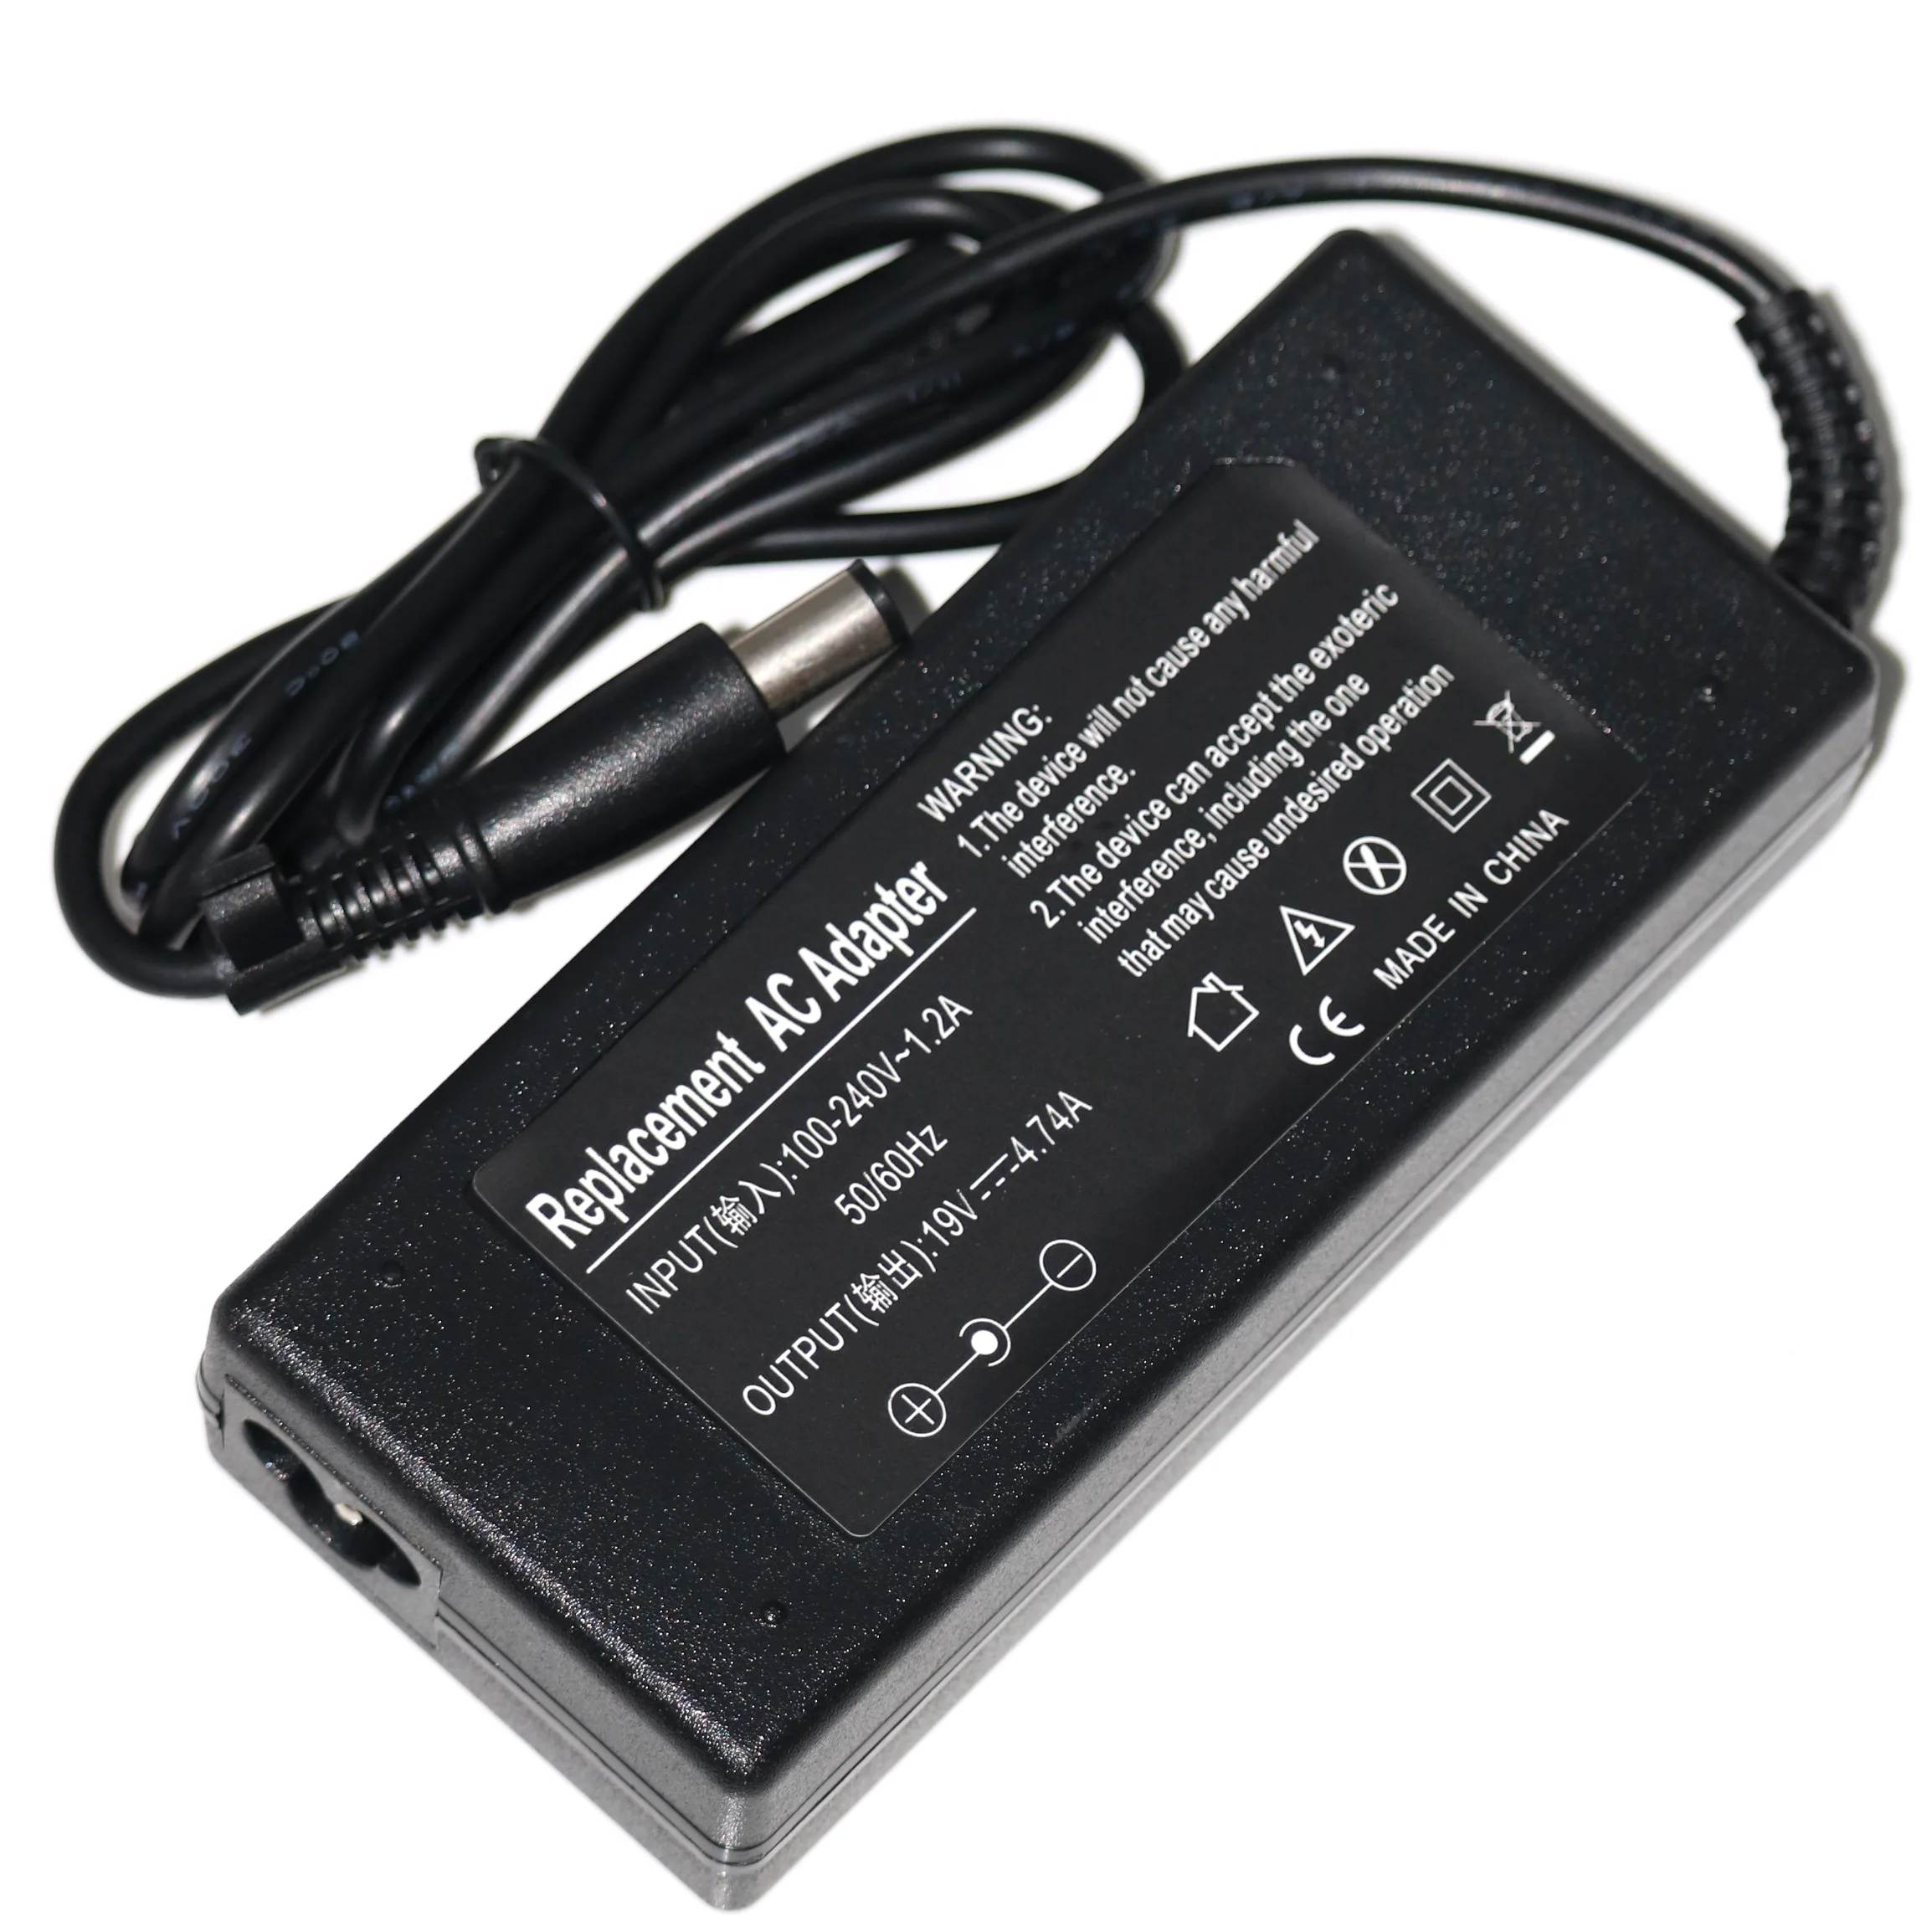 19V 4.74A 7.4x5.0mm Notebook Adapter Power Supply For HP 63955-001 609940-001 PPP012H-S Pavilion Dv4 Dv5 G4 G6 G7 AC Charger genuine tpn ca13 19 5v 6 9a ac adapter charger tpn da11 l15534 001 135w power supply for hp pavilion bc400ur laptop adapter